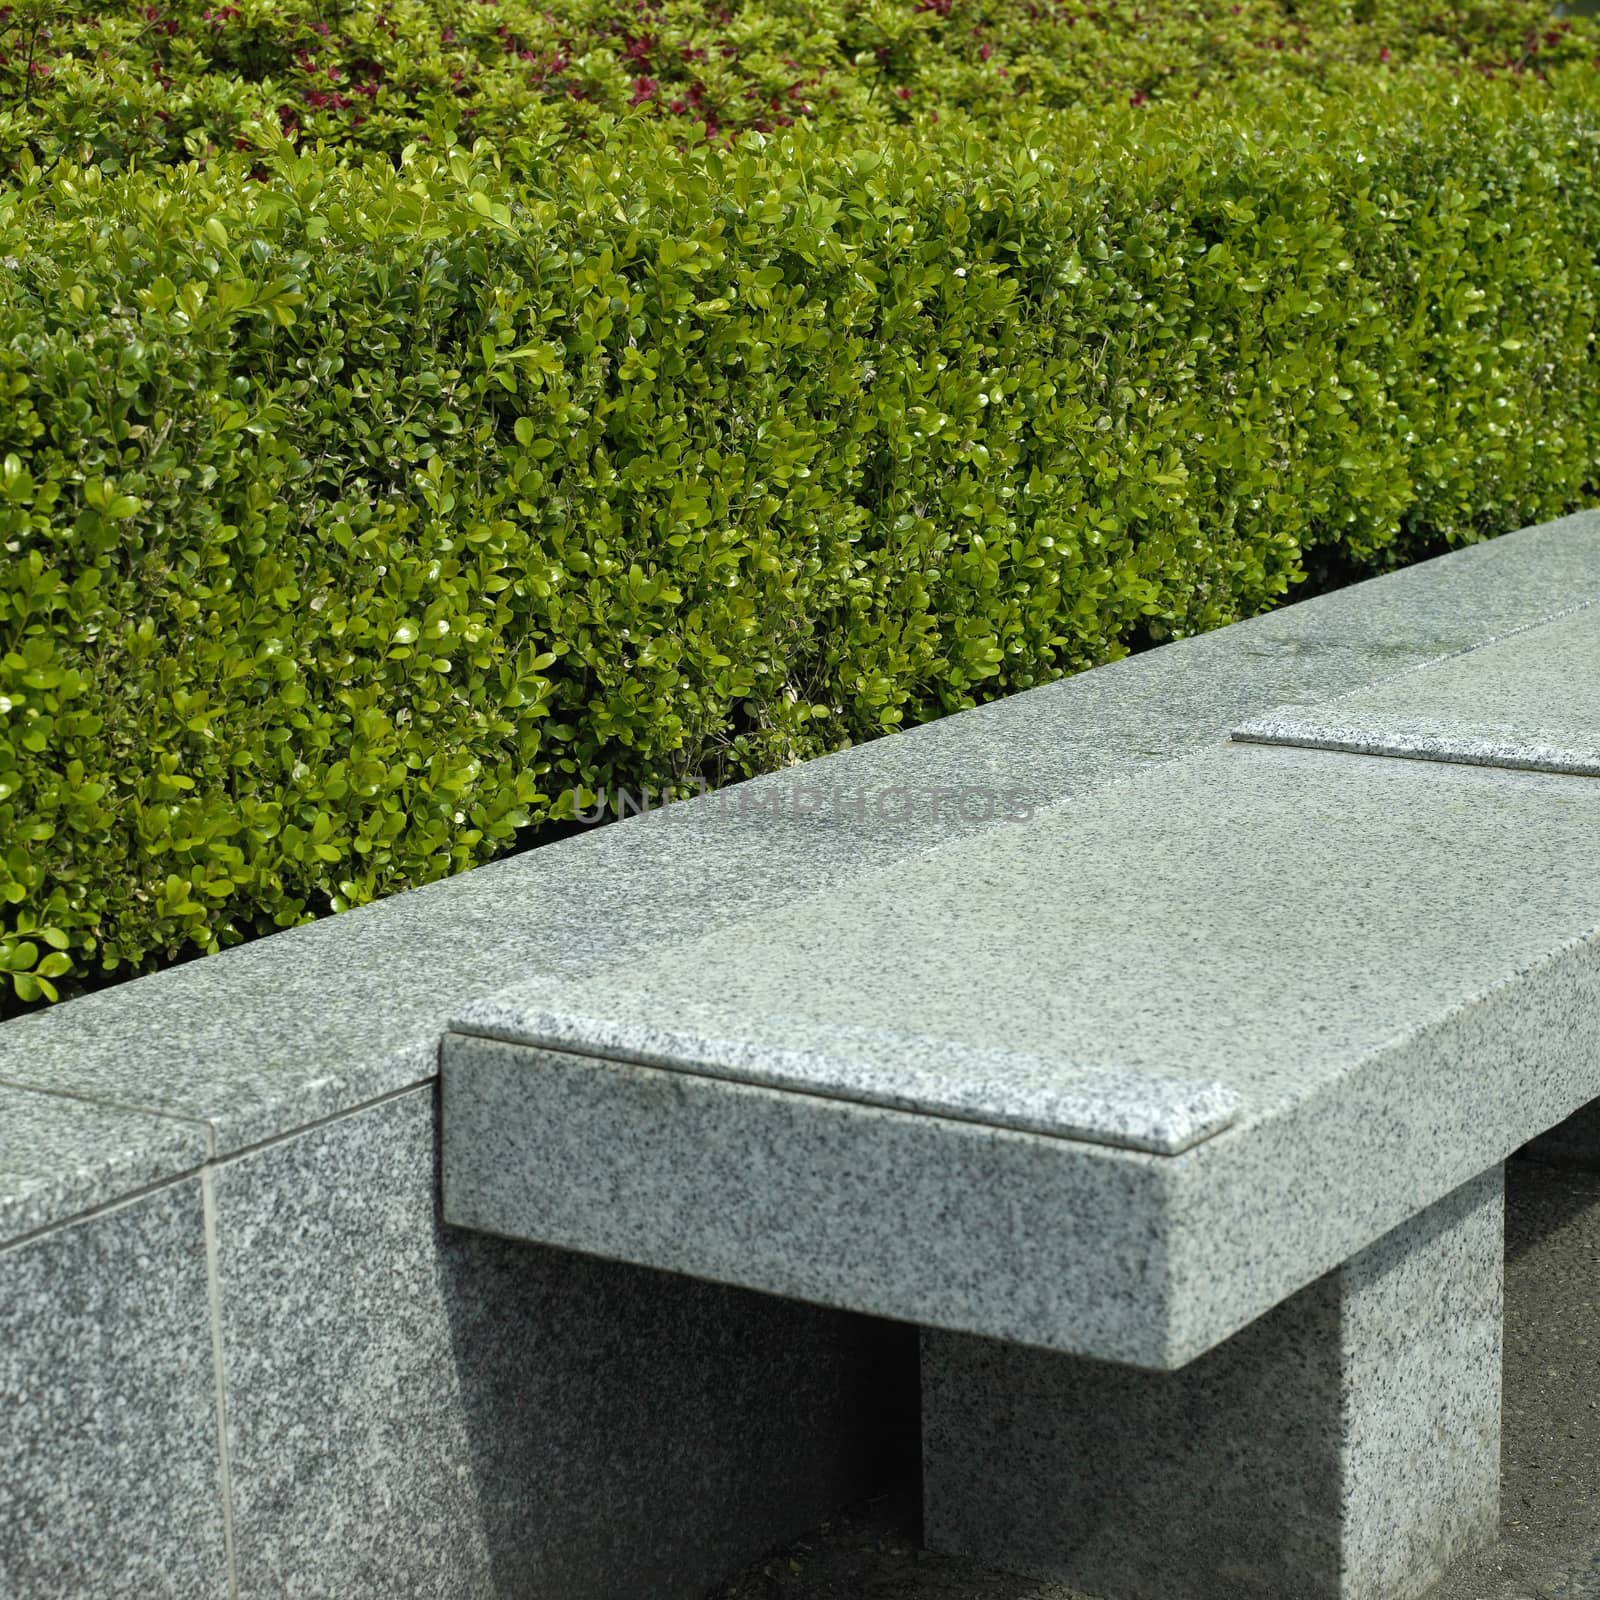 Sturdy marble park bench and stone wall backed by a trimmed green hedge